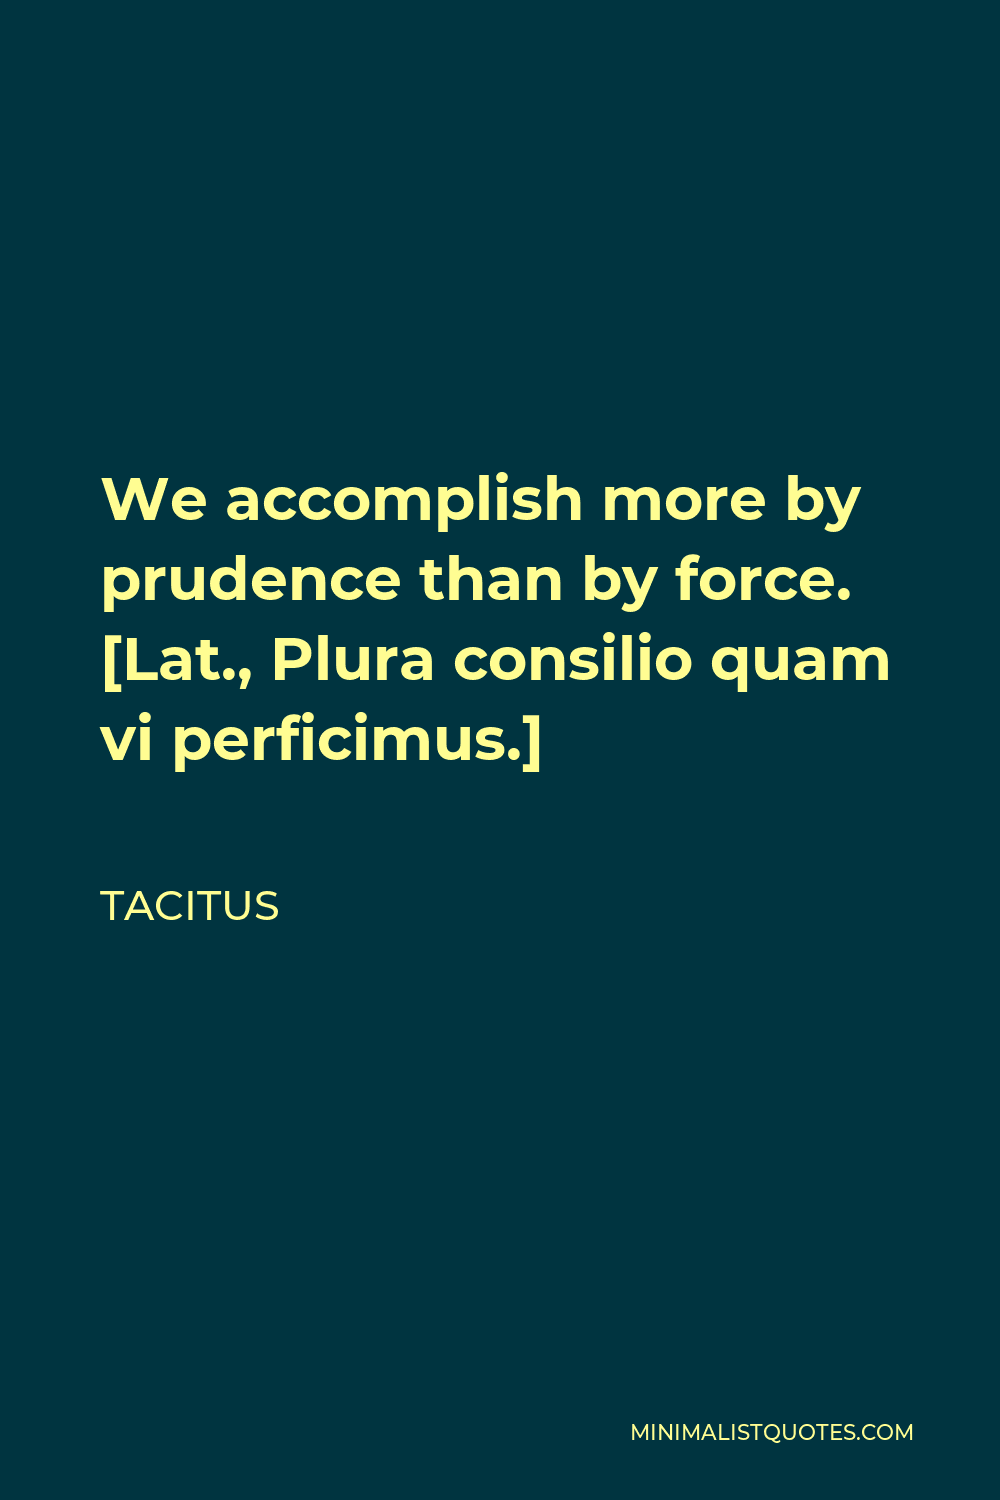 Tacitus Quote - We accomplish more by prudence than by force. [Lat., Plura consilio quam vi perficimus.]